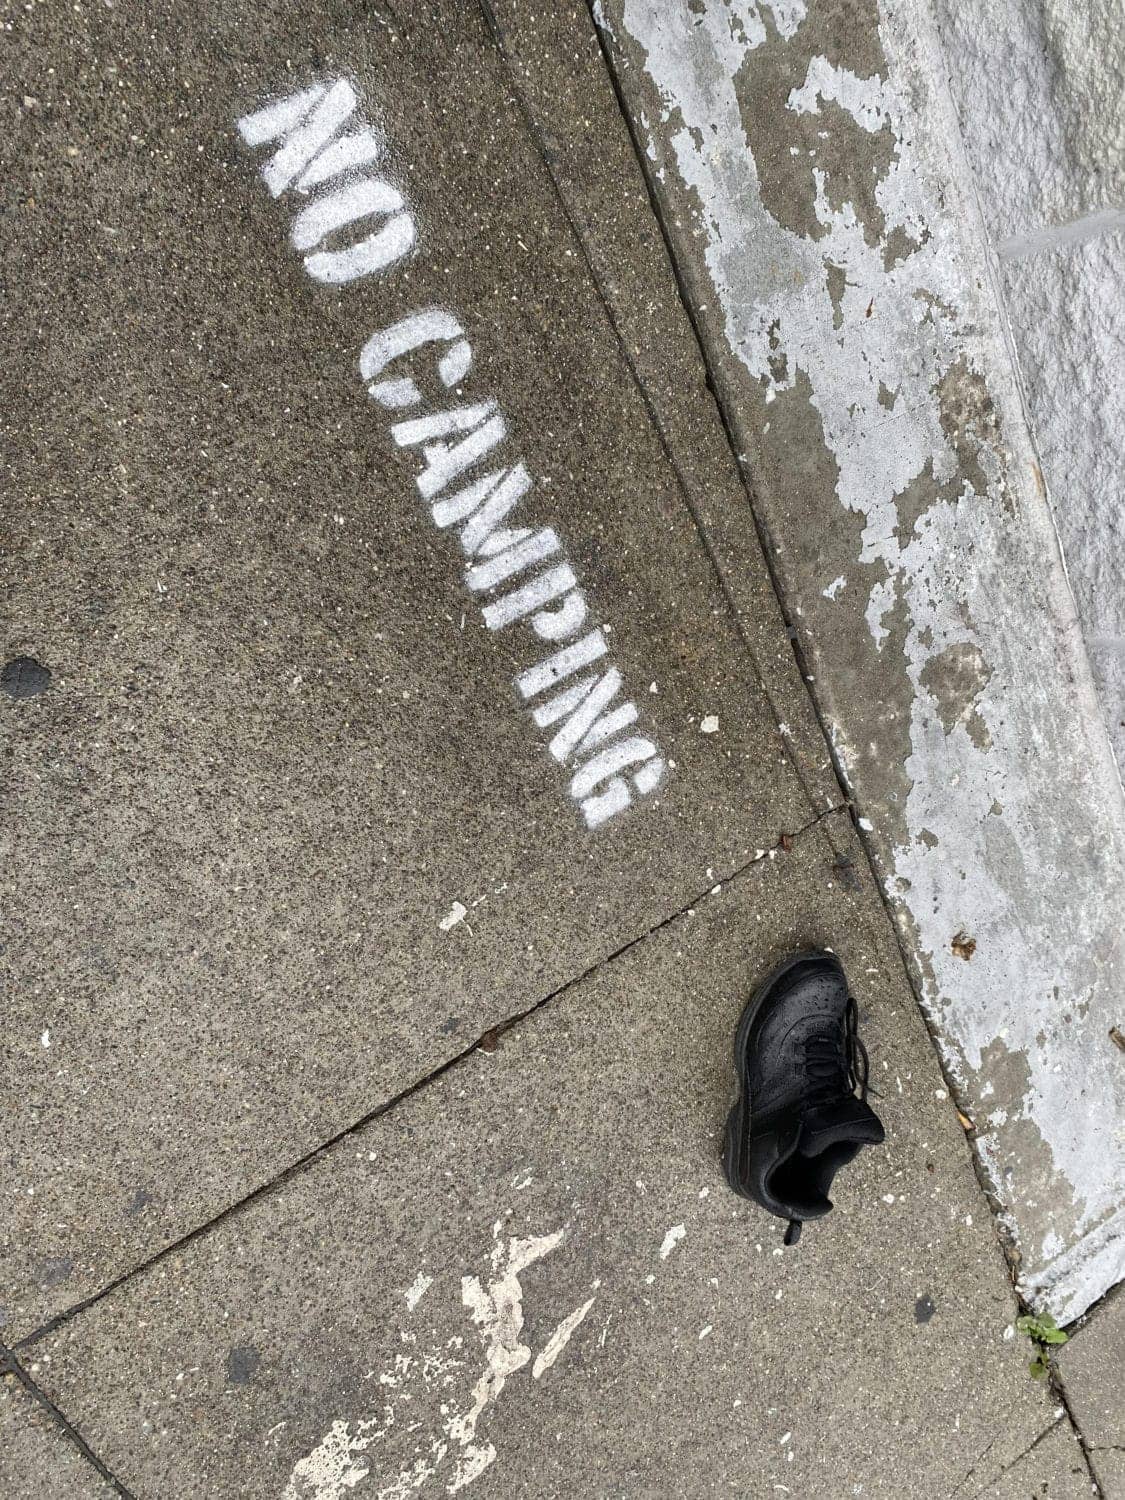 One-empty-shoe-next-to-No-Camping-stenciled-on-sidewalk-by-PNN, A State of Emergency … for people sleeping outside, Local News & Views 